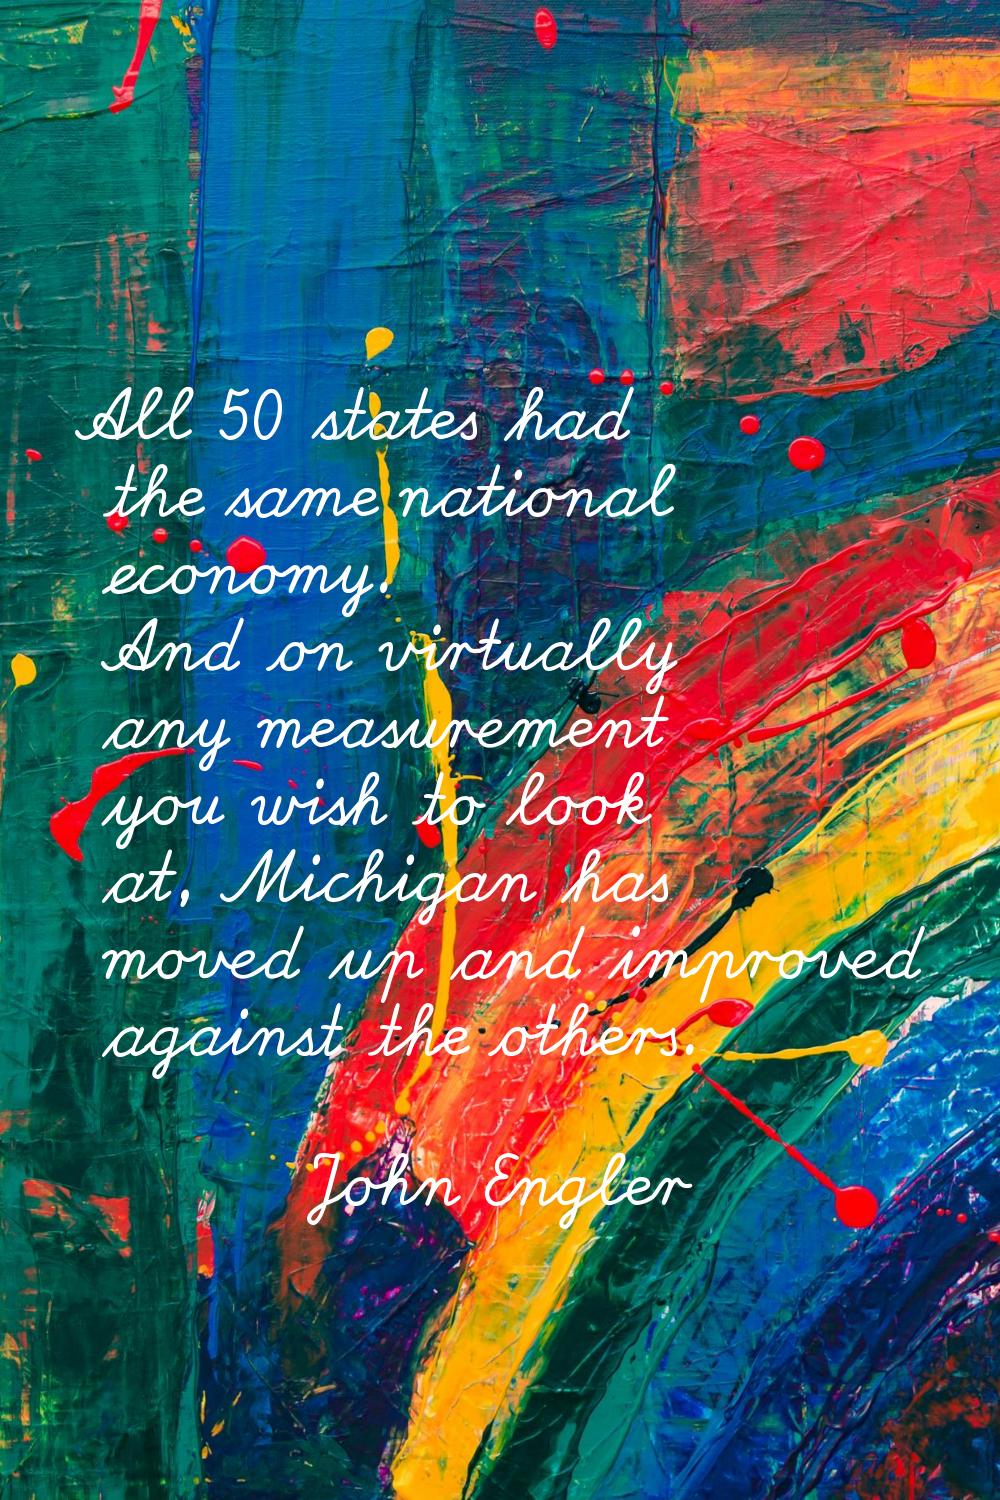 All 50 states had the same national economy. And on virtually any measurement you wish to look at, 